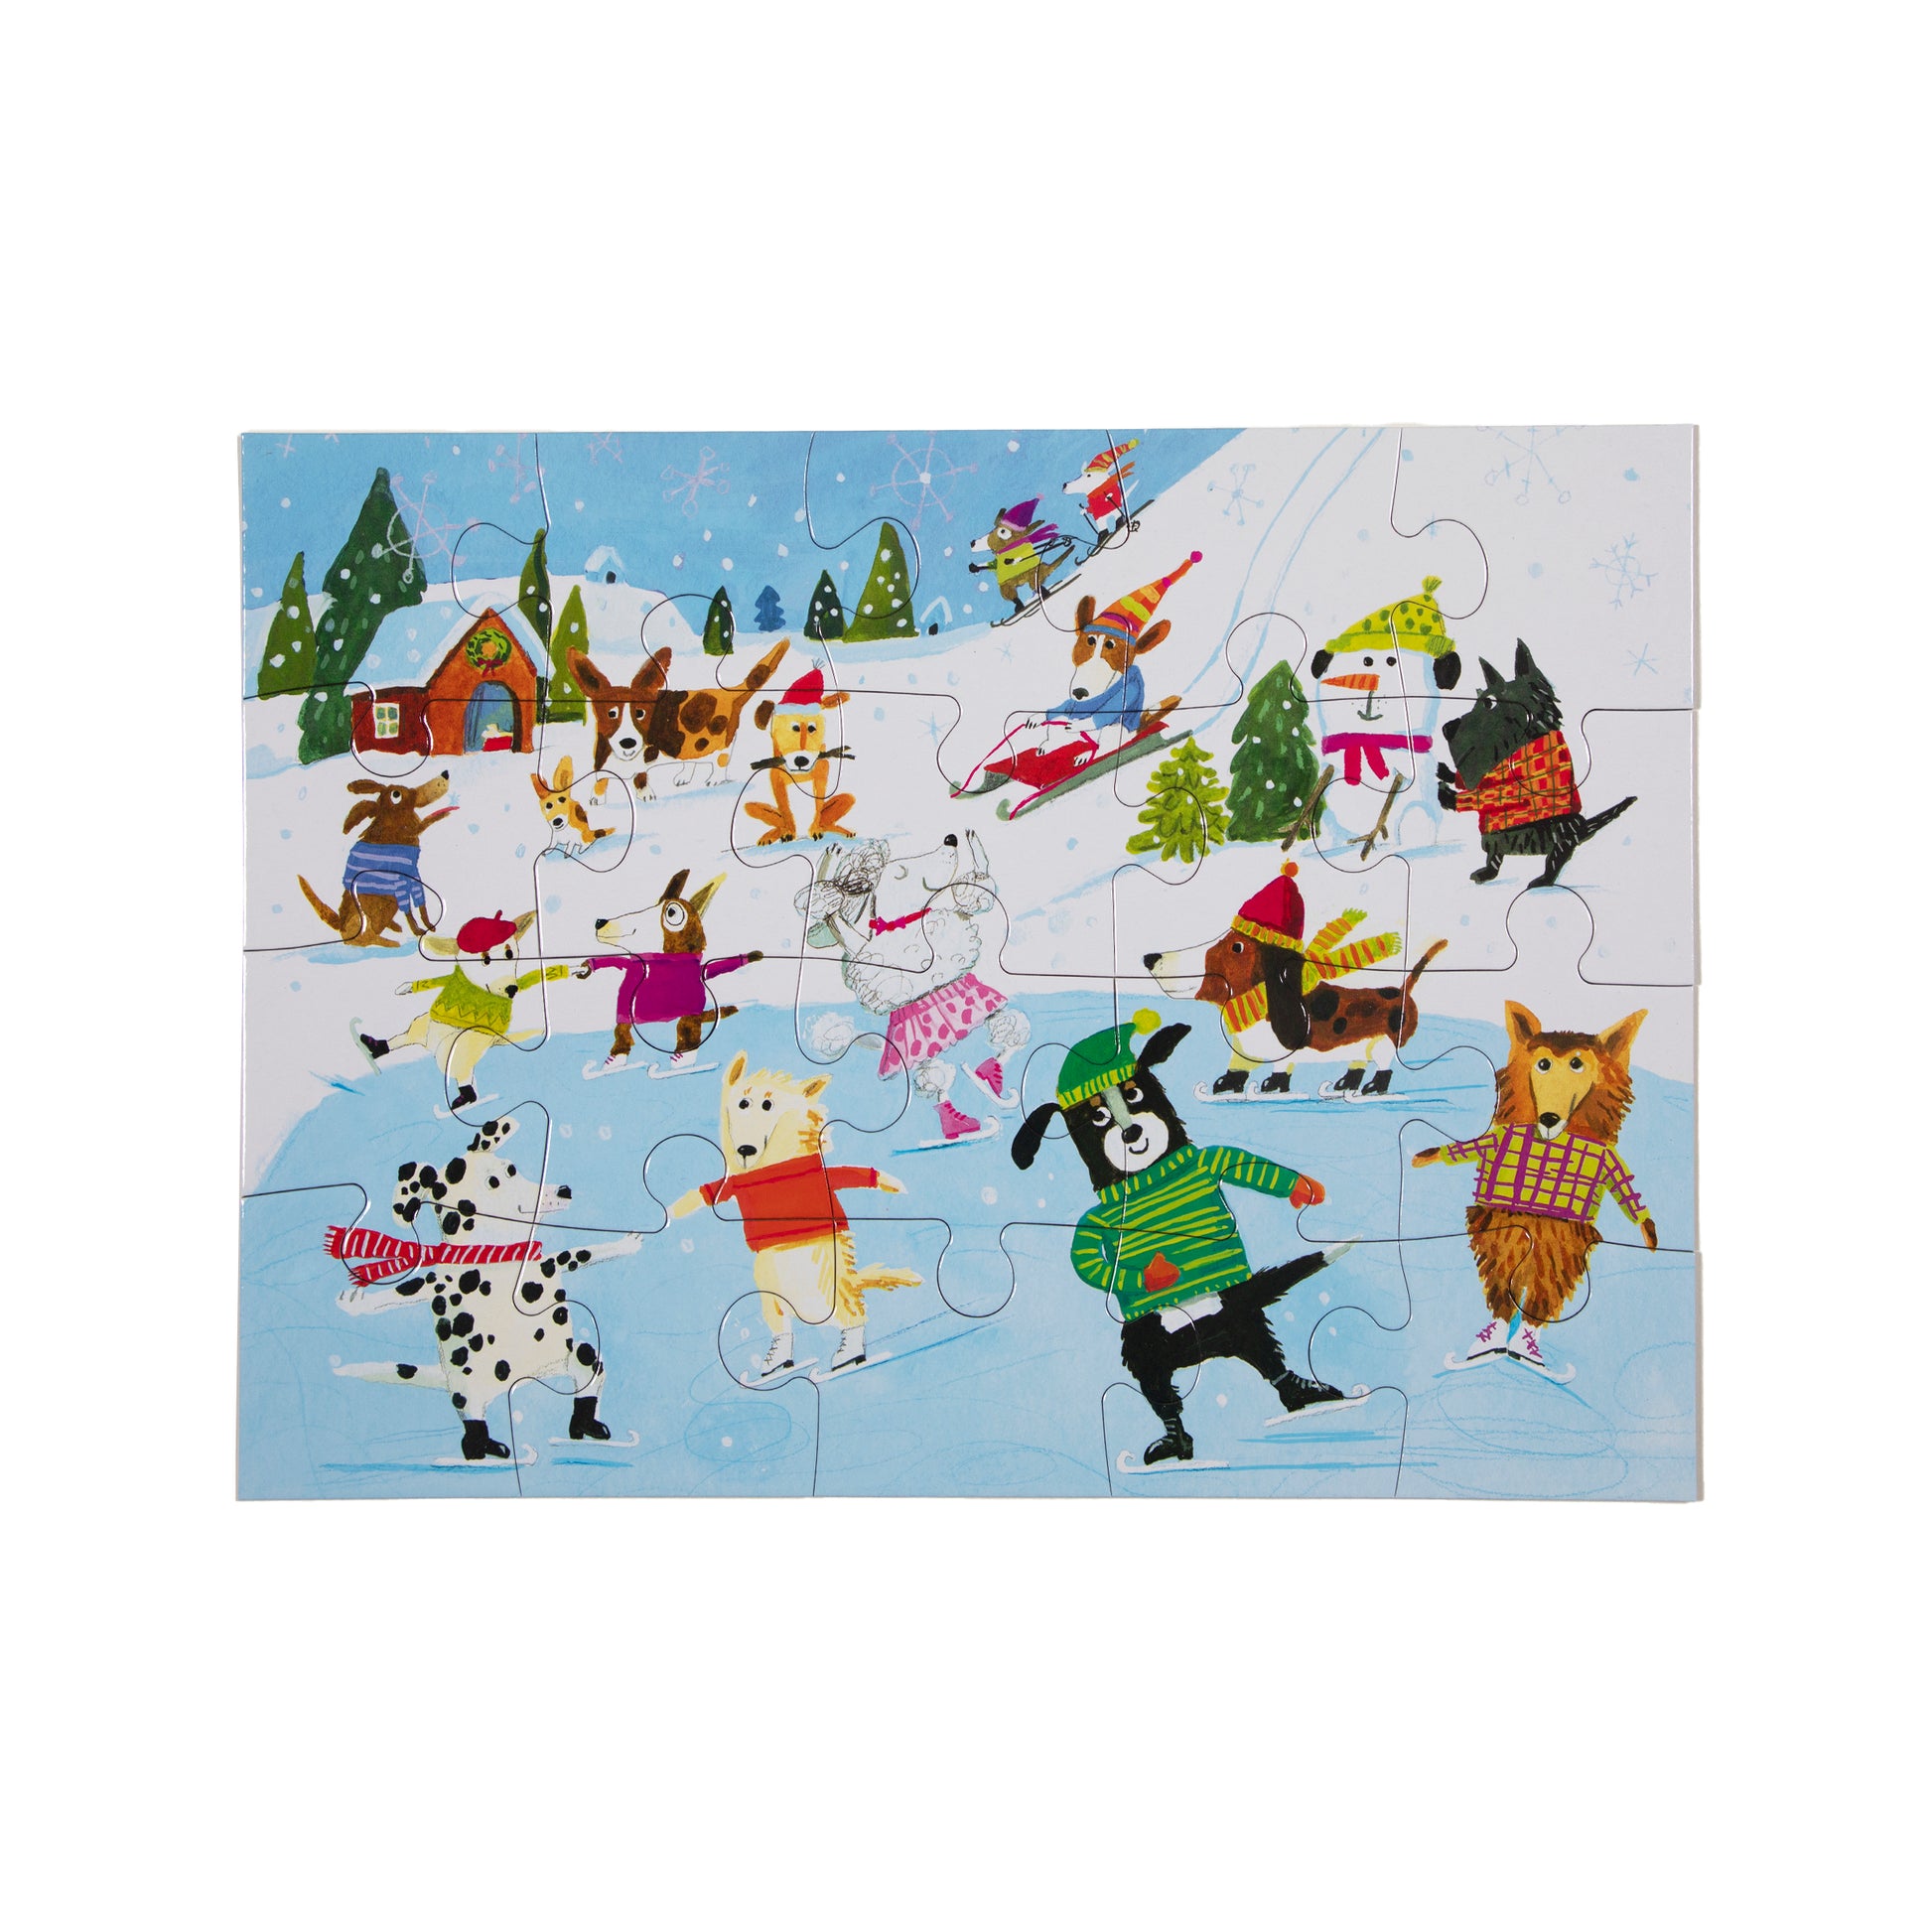 Skating Dogs 20 Piece Holiday Jigsaw Puzzle eeBoo Unique Gift for Kids